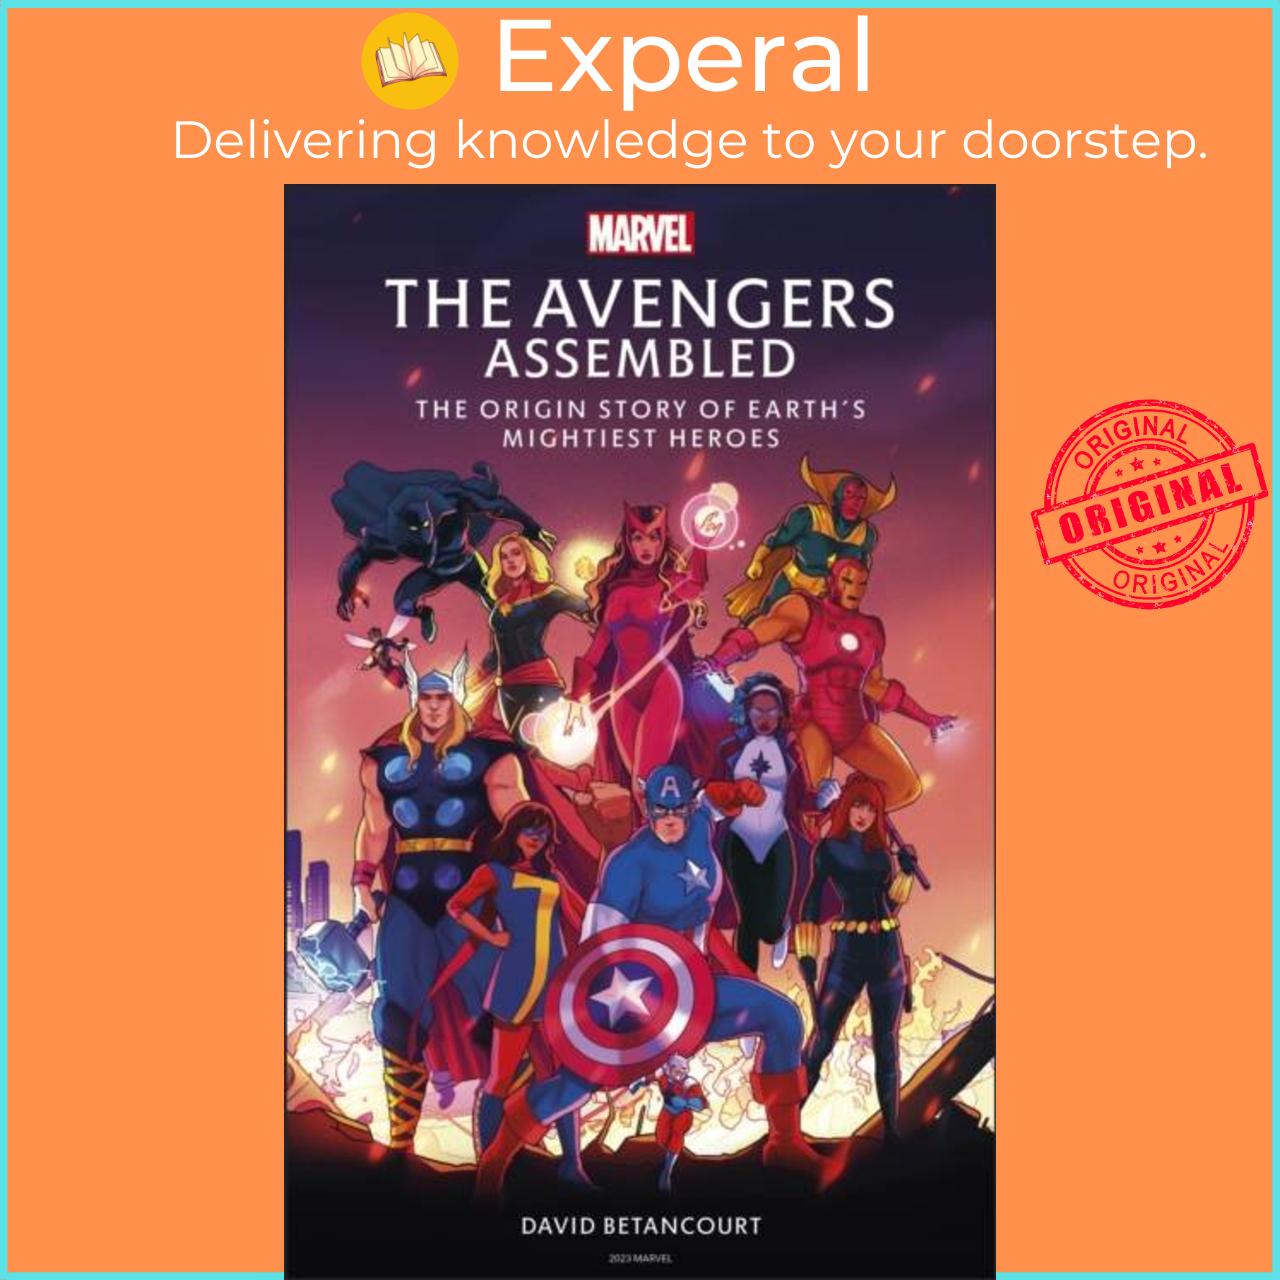 Sách - The Avengers Assembled - The Origin Story of Earth's Mightiest Heroes by David Betancourt (UK edition, hardcover)